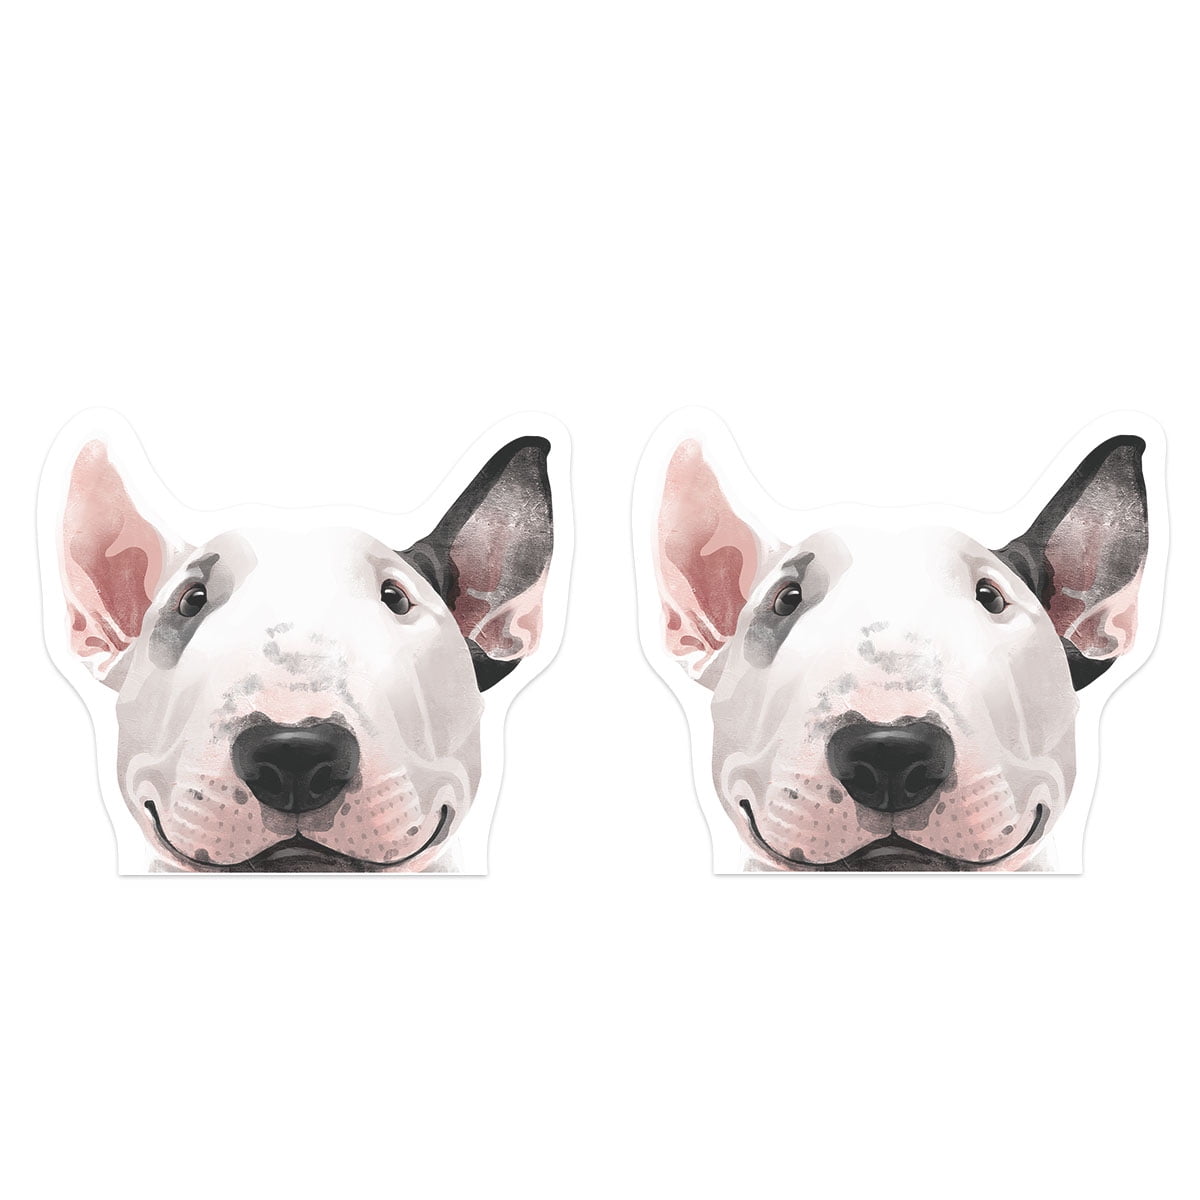 2 Pieces Set Bull Terrier Dog  Sticker Decals with custom text 20 Colors To Choose From U.S.A Free Shipping